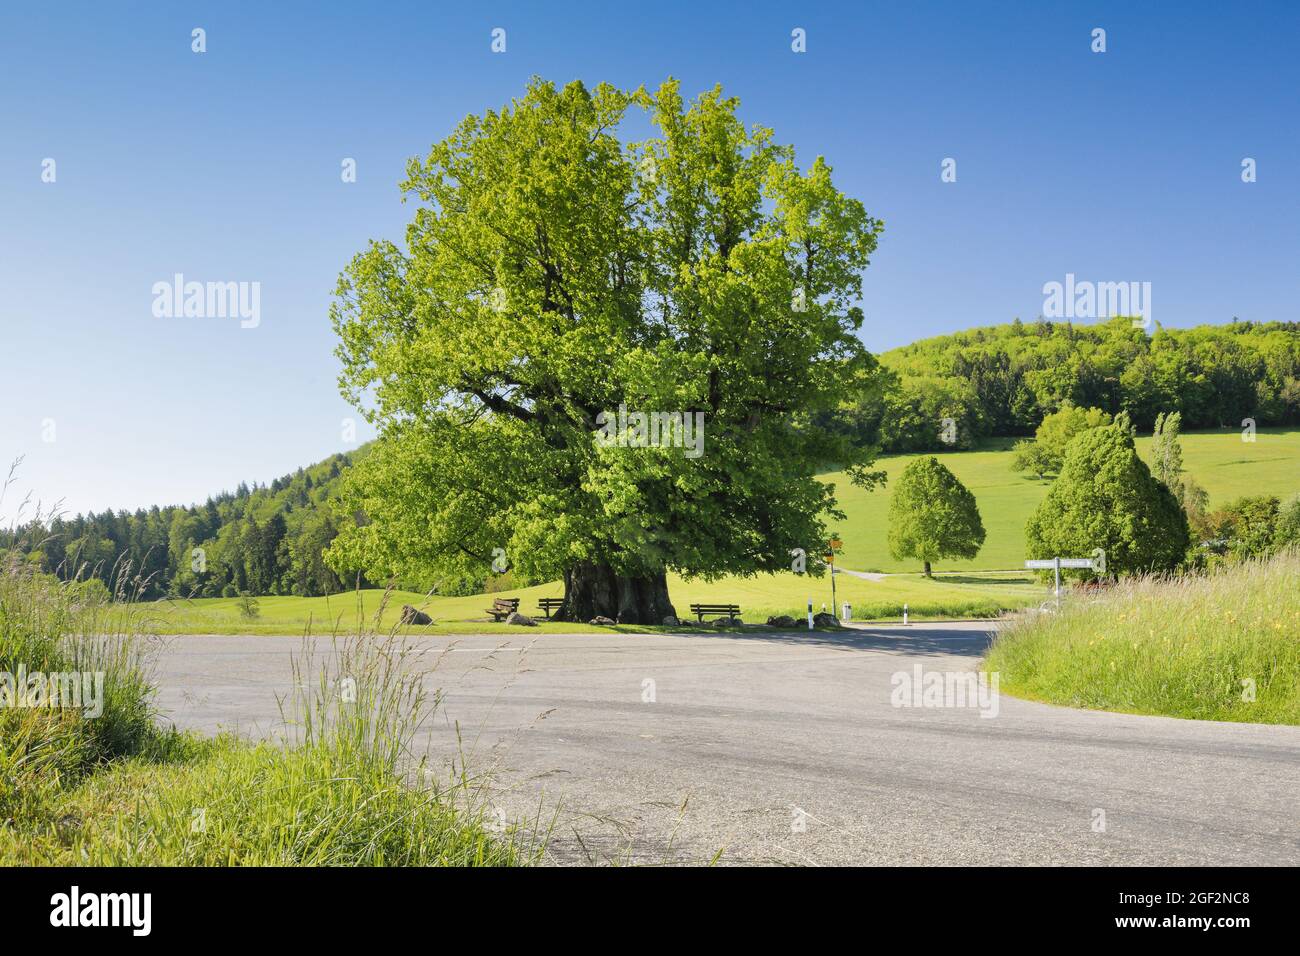 large-leaved lime, lime tree (Tilia platyphyllos), Linden tree of Linn, large ancient linden tree standing at the fork under a blue sky, Switzerland, Stock Photo